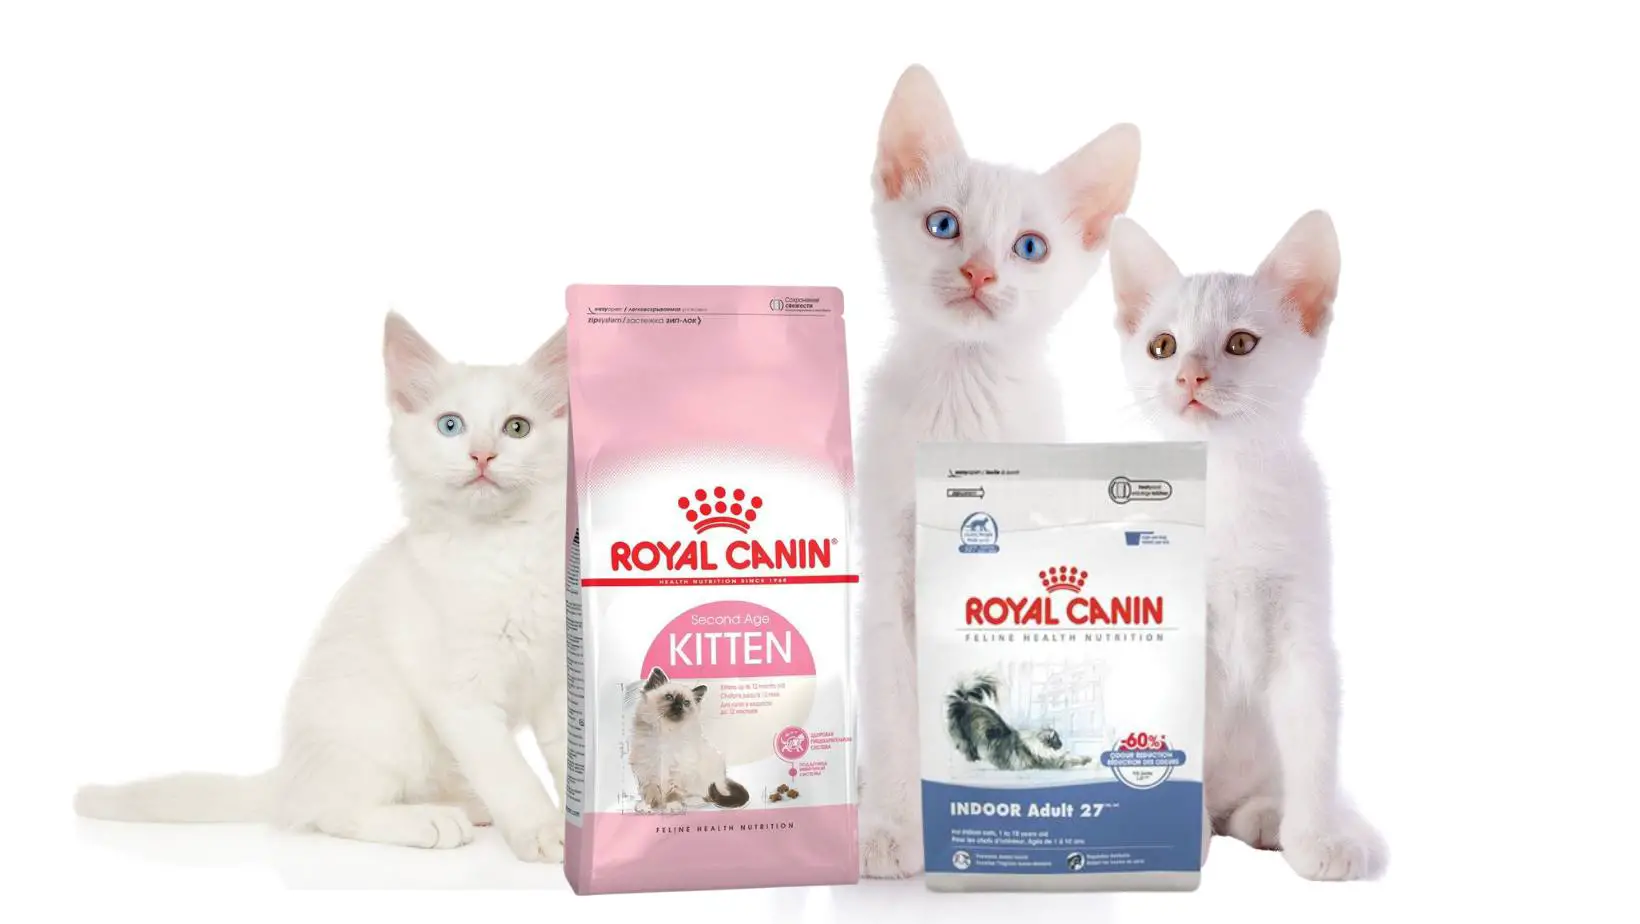 Is Royal Canin Good Cat Food?